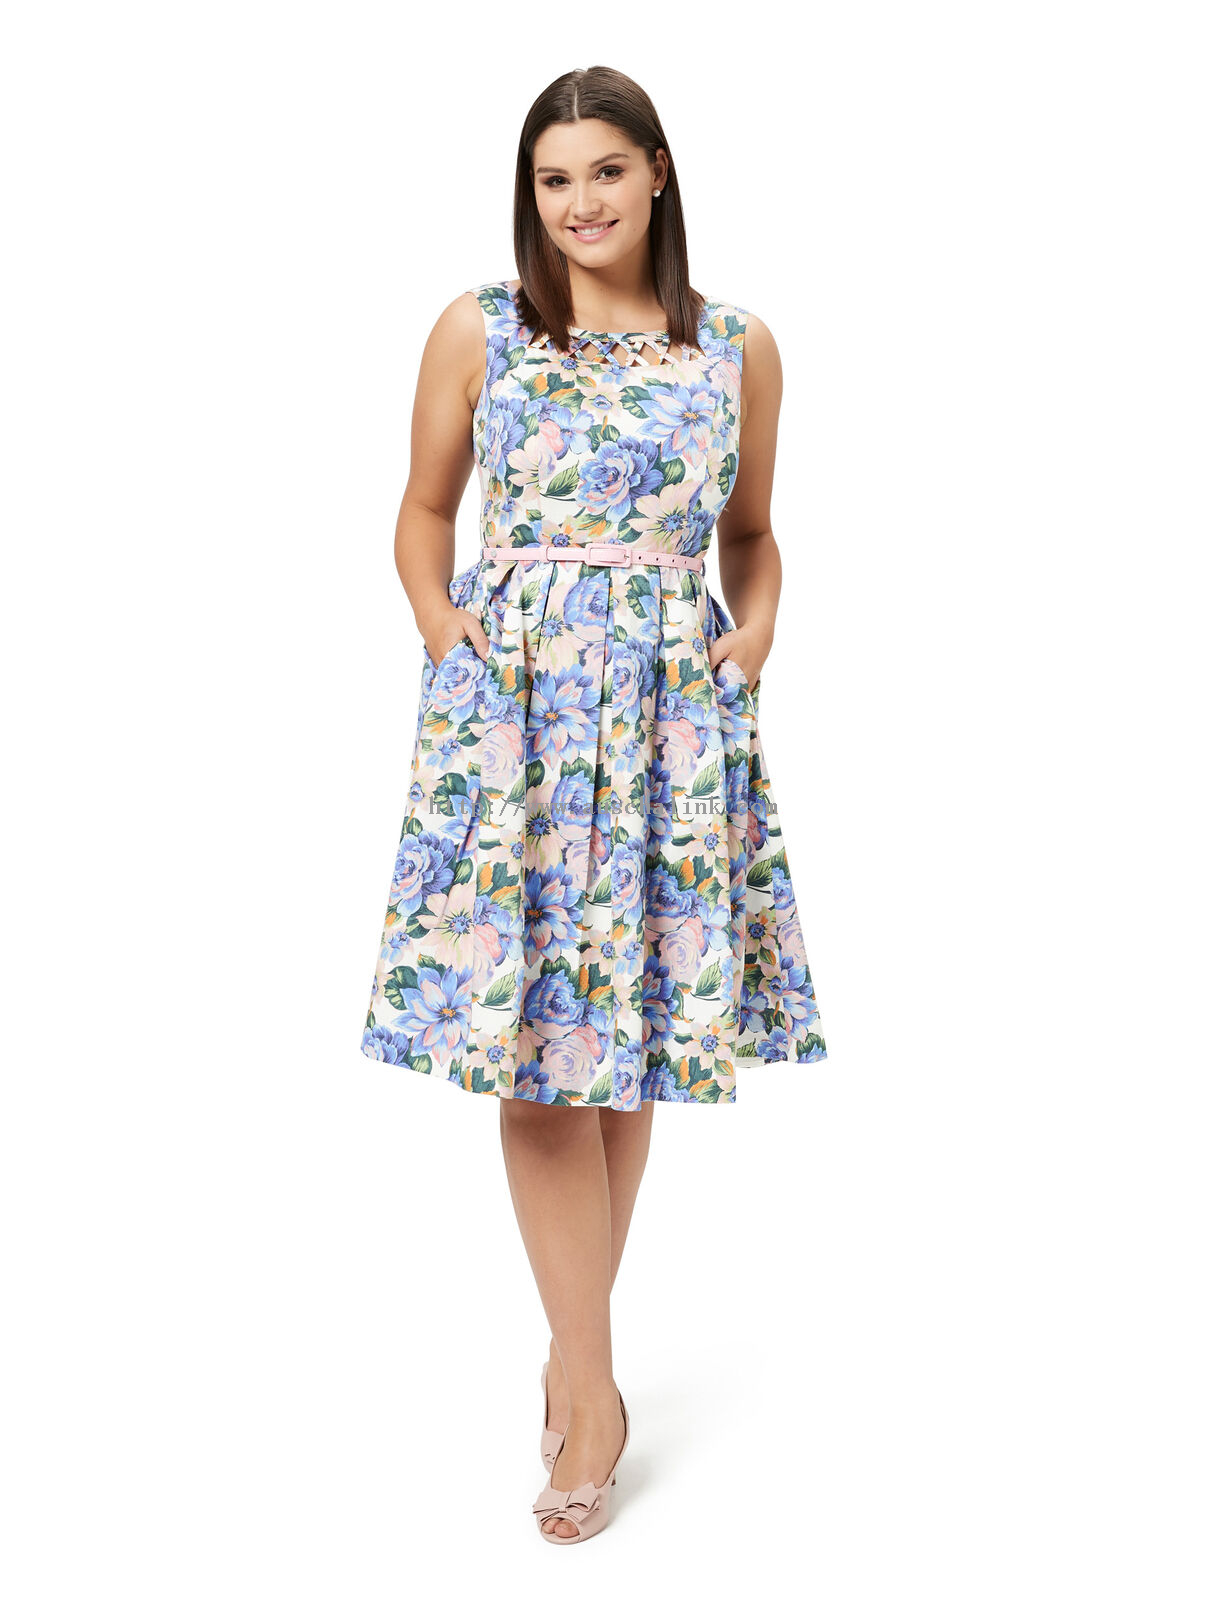 FANGIRL FLORAL PROM DRESS